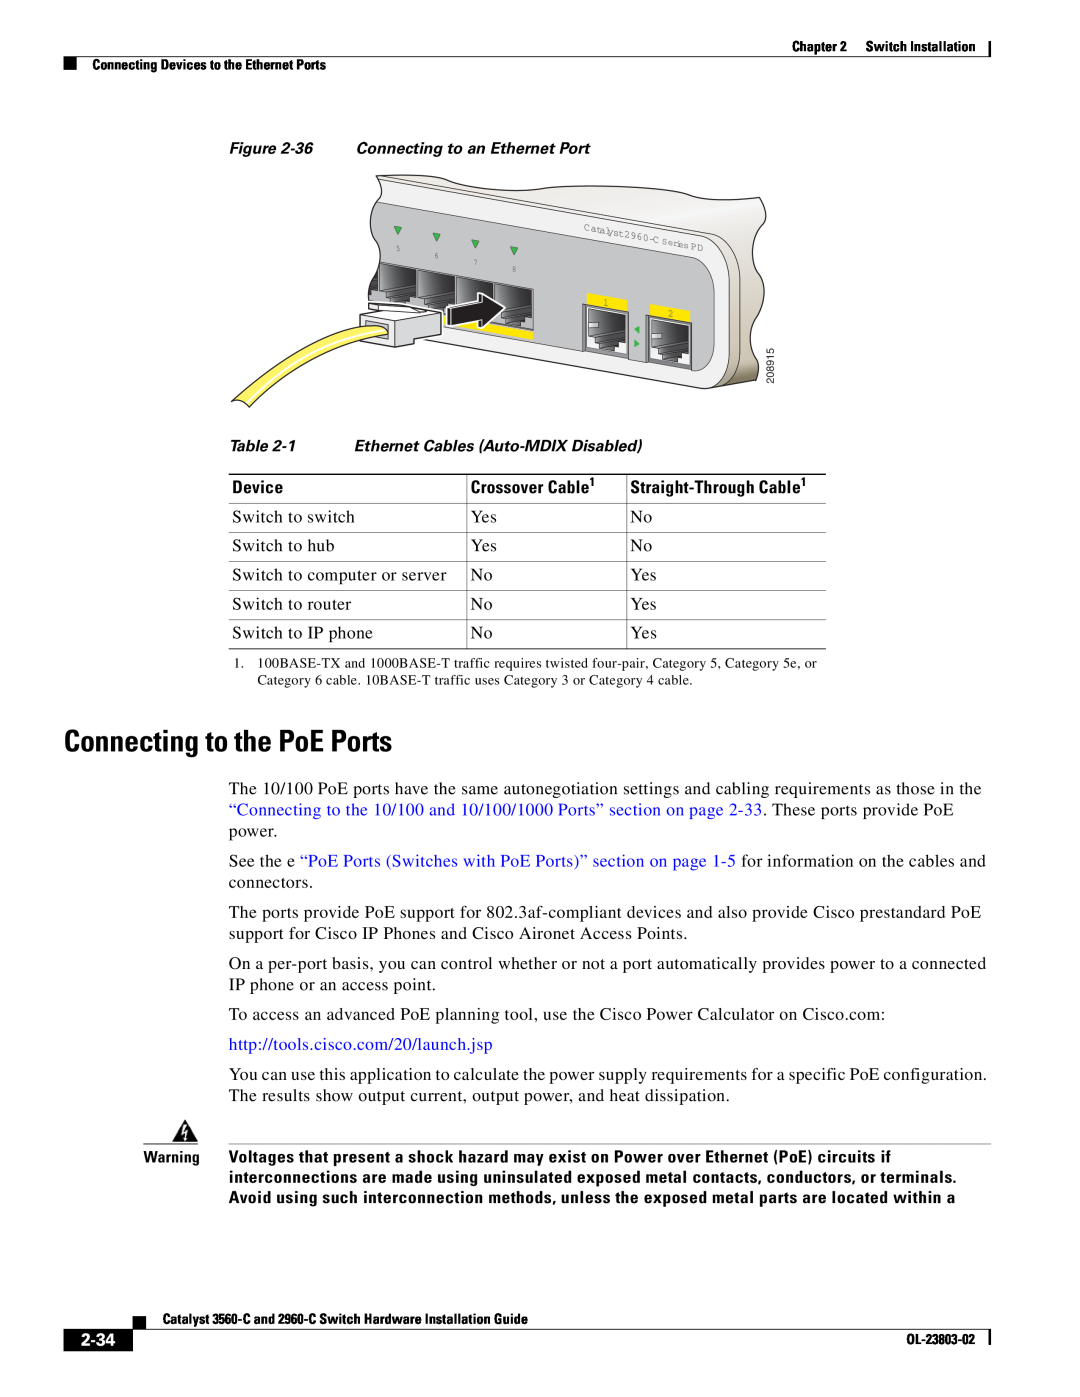 Cisco Systems 3560-C manual Connecting to the PoE Ports, Device, Crossover Cable, http//tools.cisco.com/20/launch.jsp, 2-34 